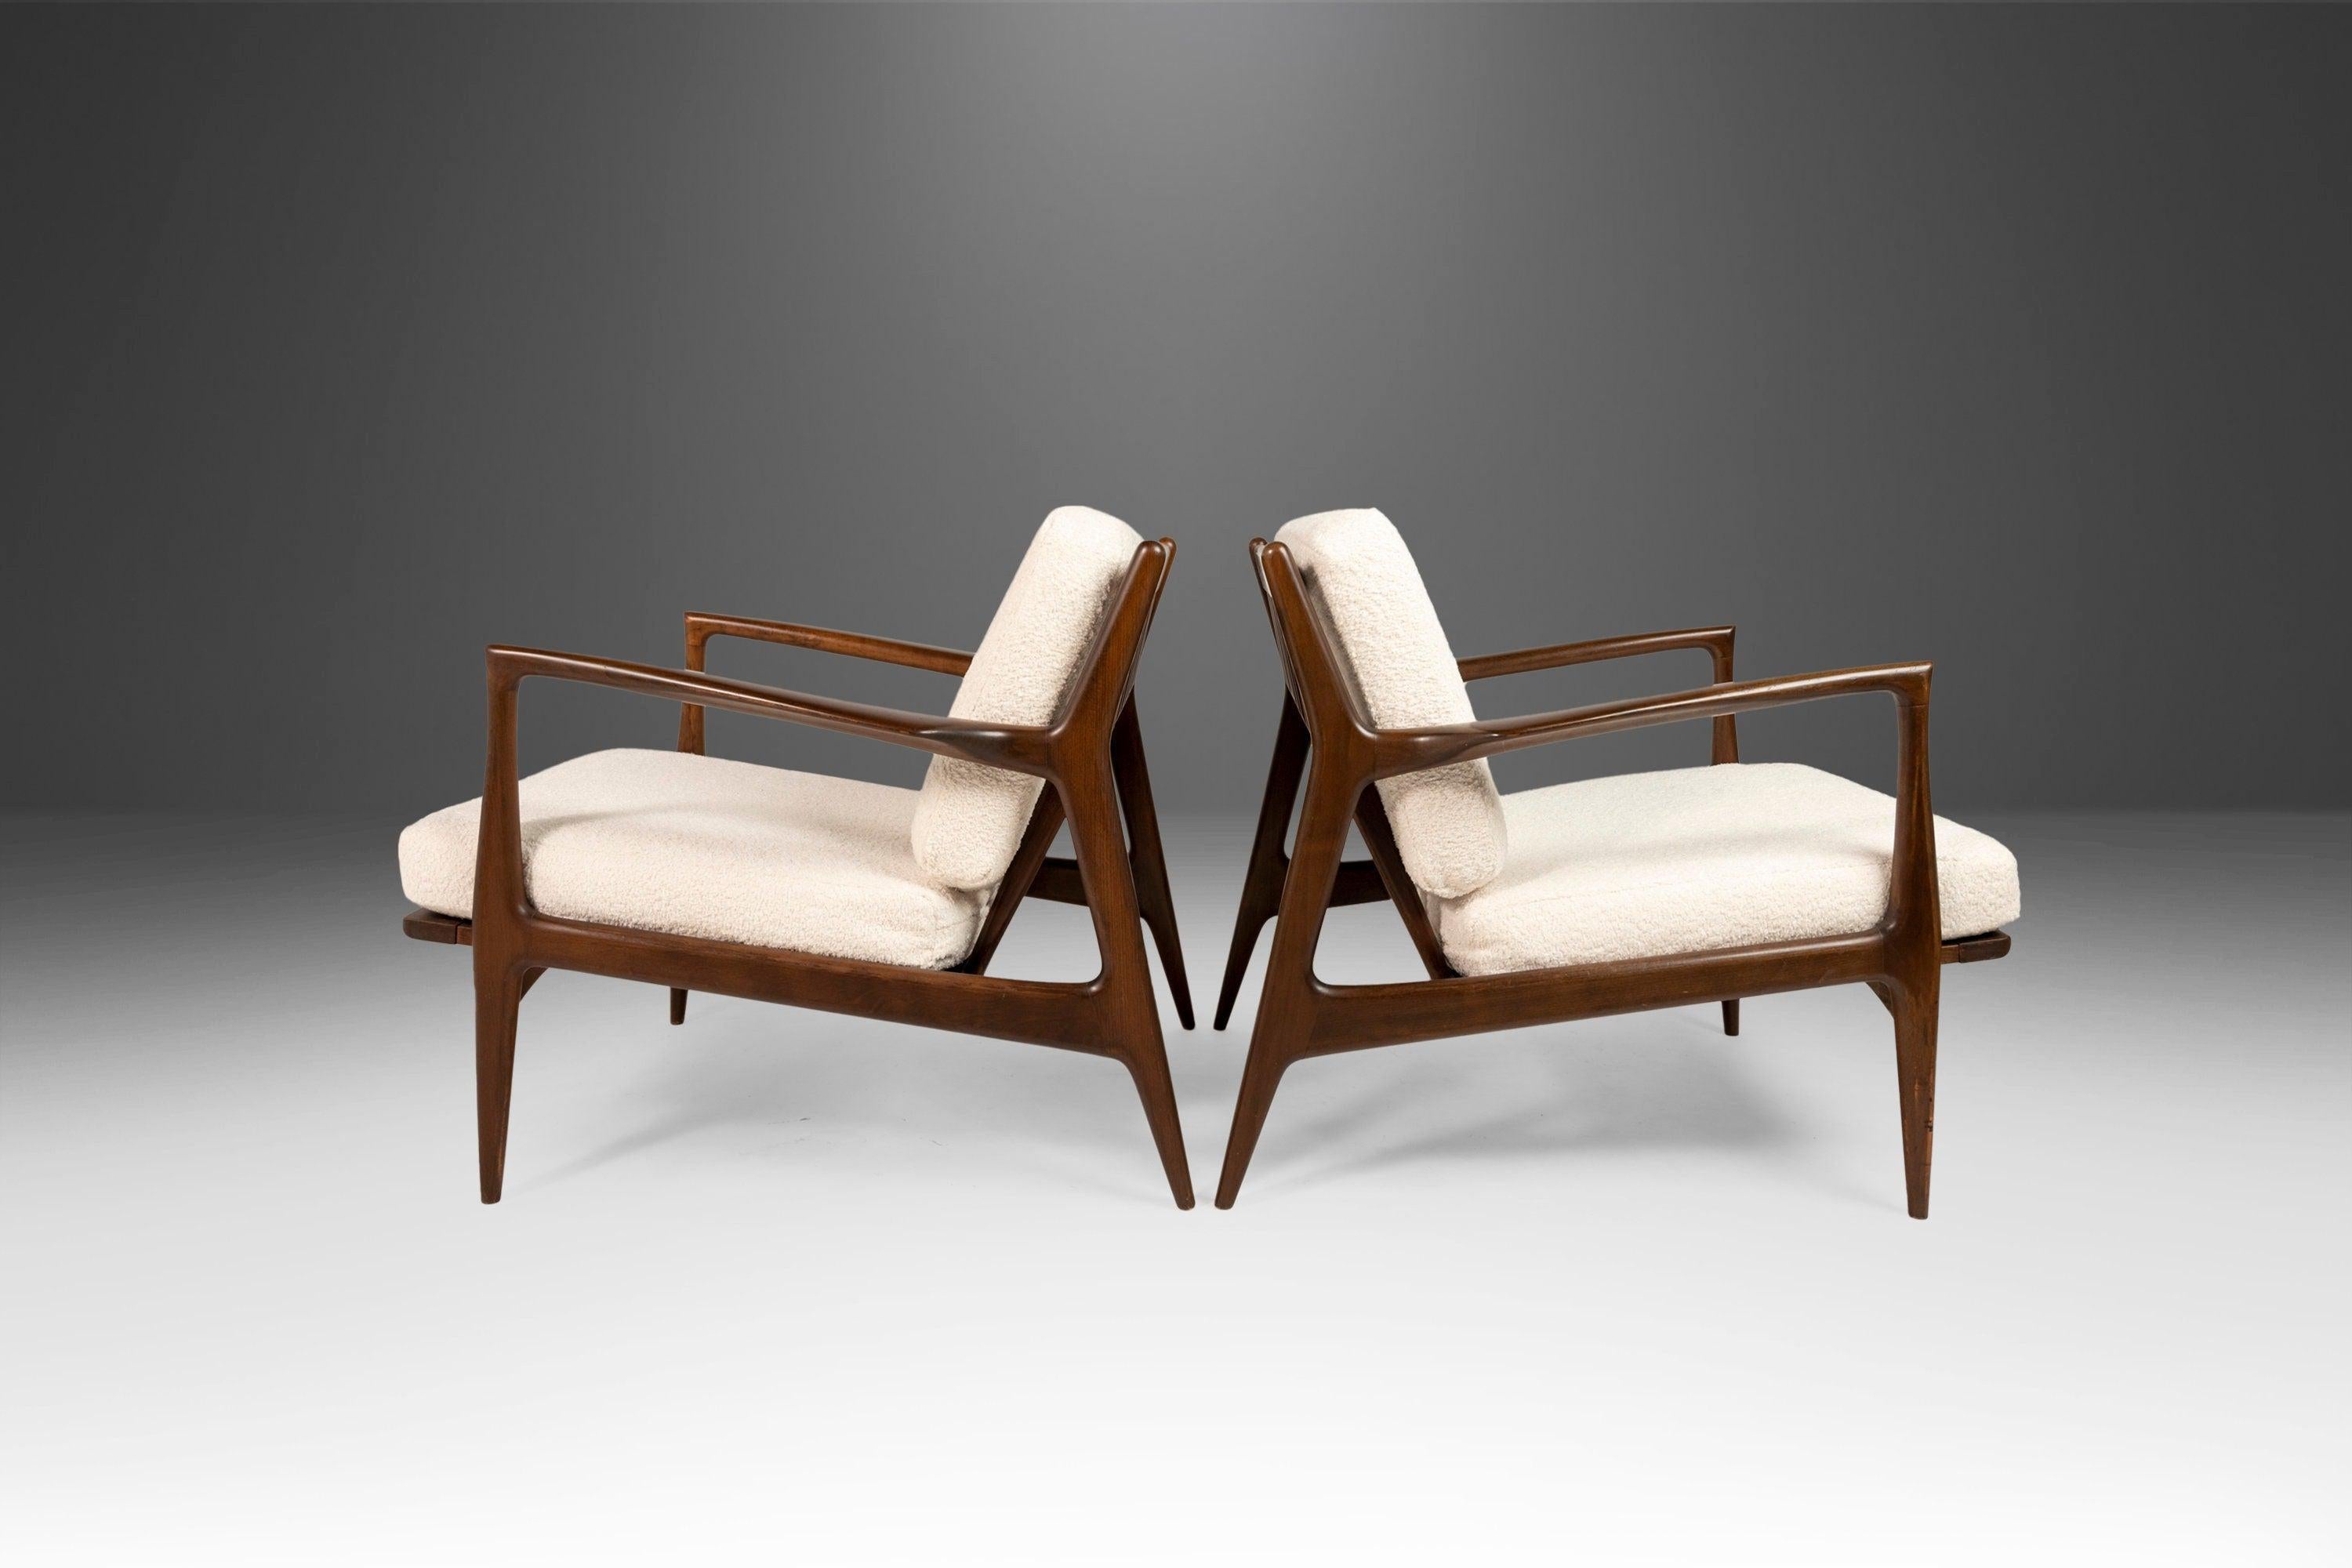 A sensational set of two lounge chairs designed by Ib Kofod-Larsen for Selig in Denmark. This outstanding 'Blade' chair has an original Selig manufacturer's badge and was built to high Danish standards in the 1960's using walnut wood. The seat and